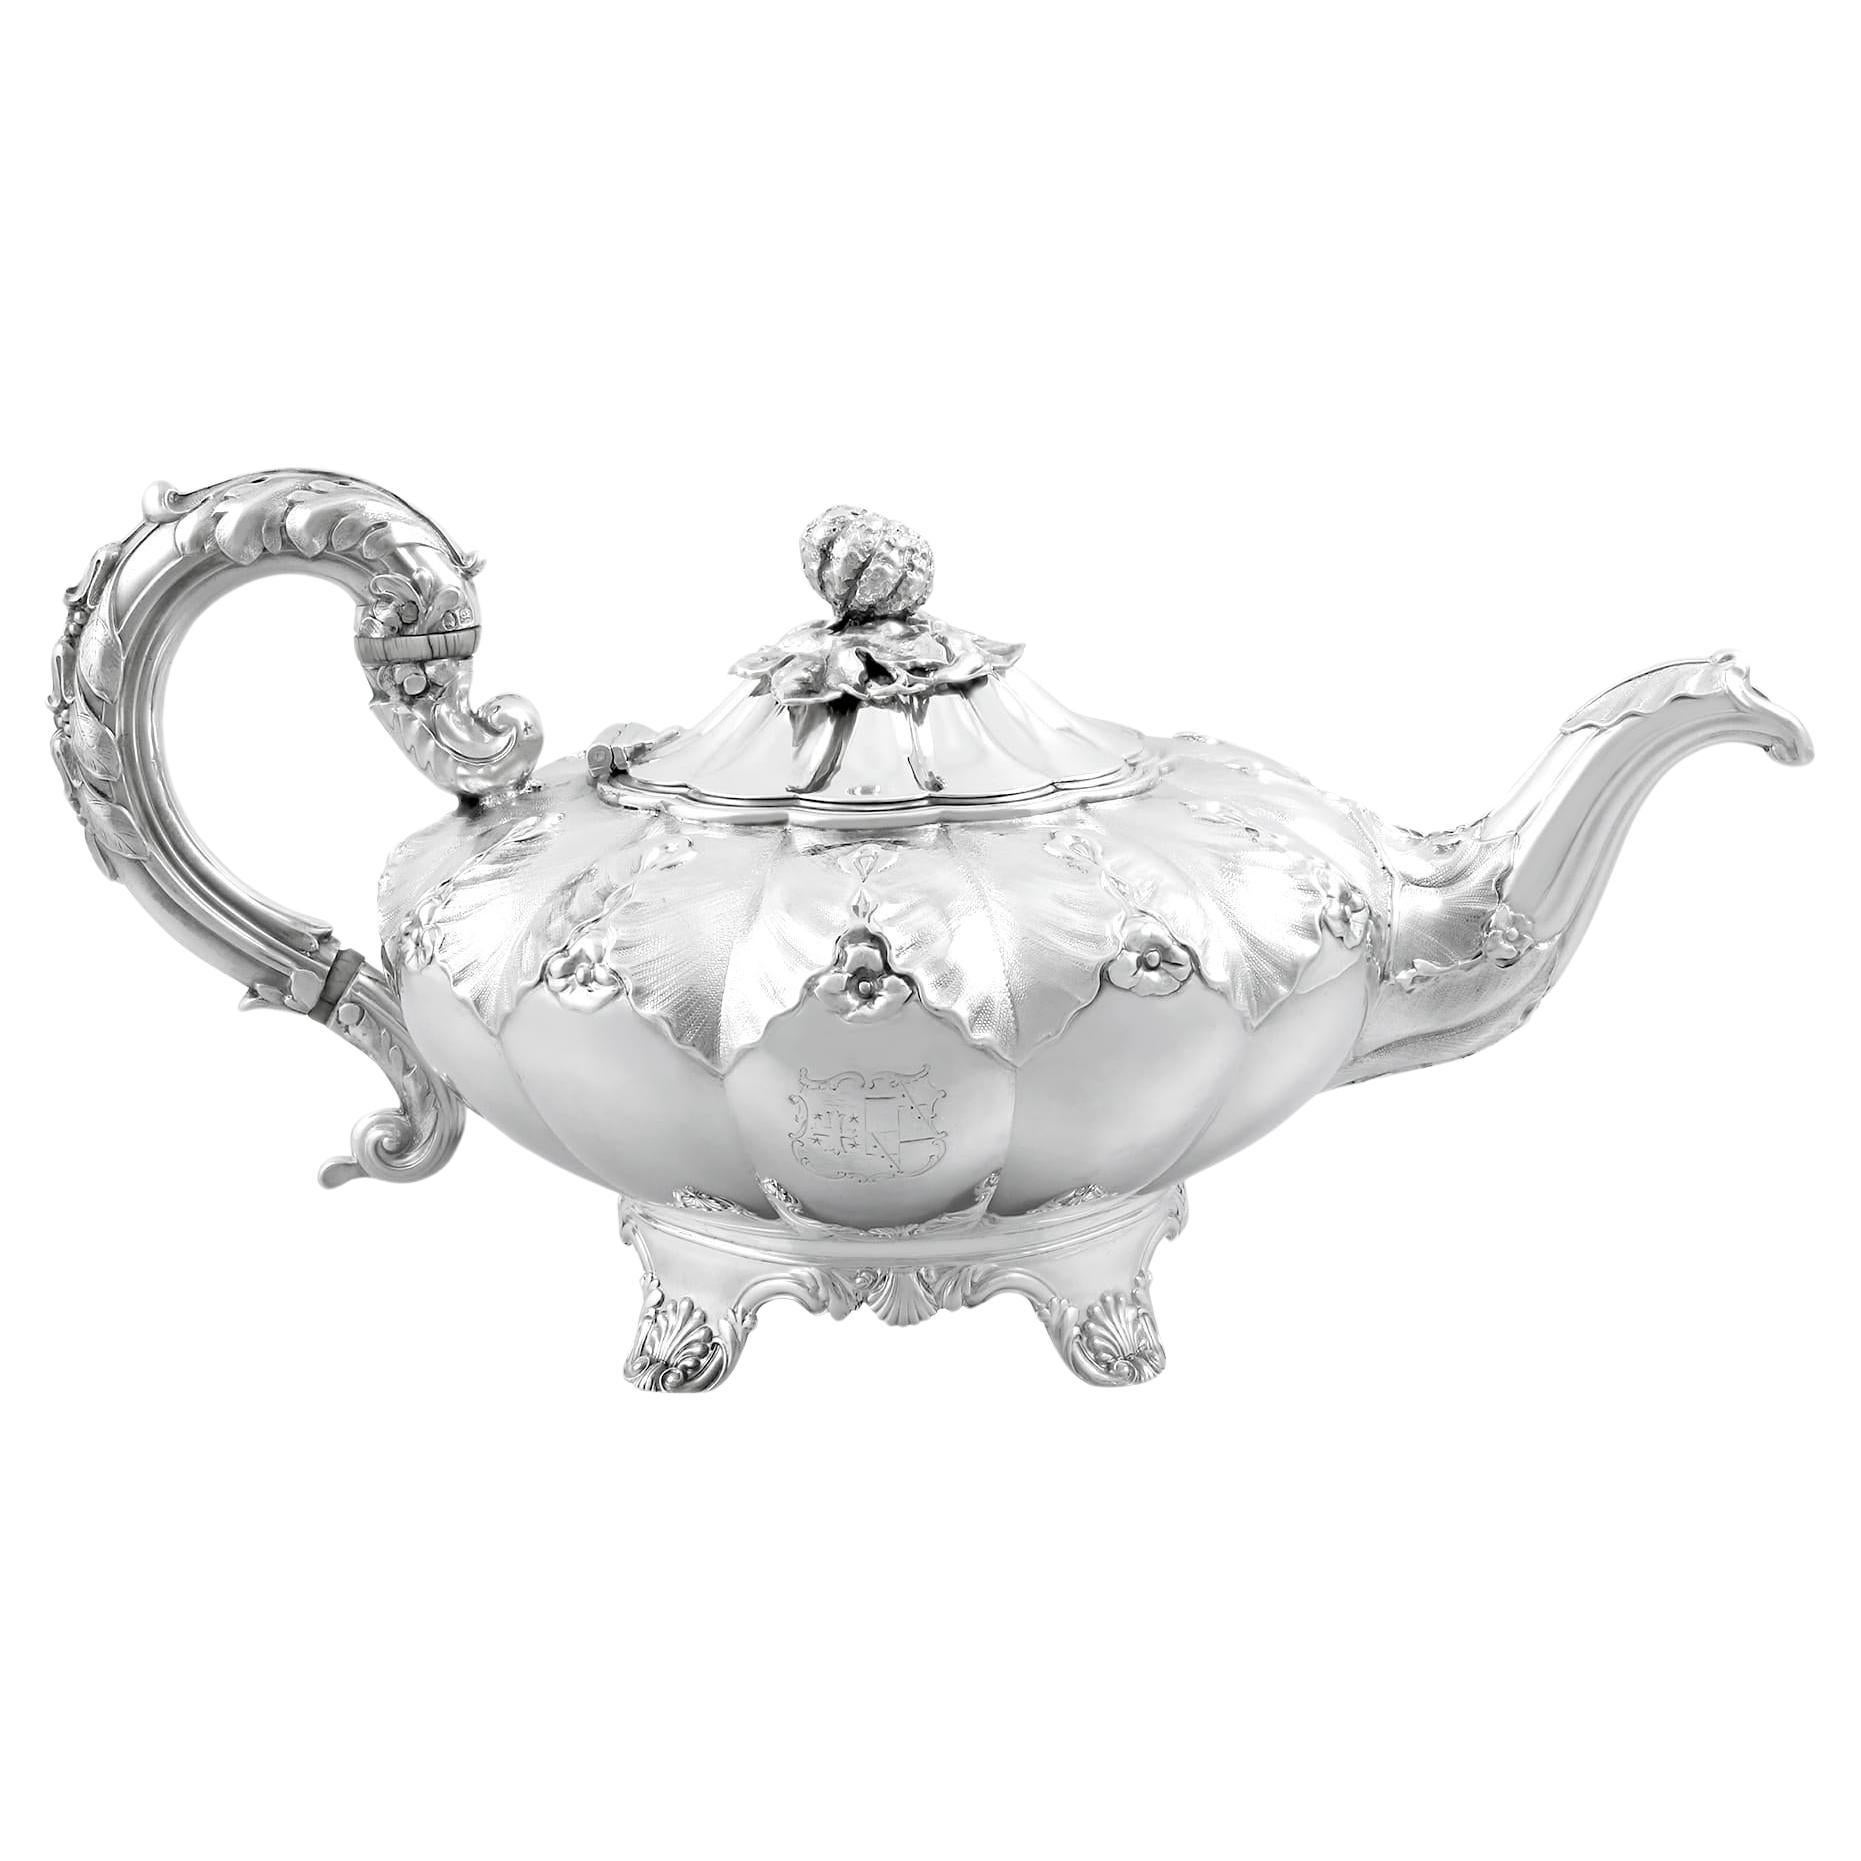 Are silver teapots safe to use?